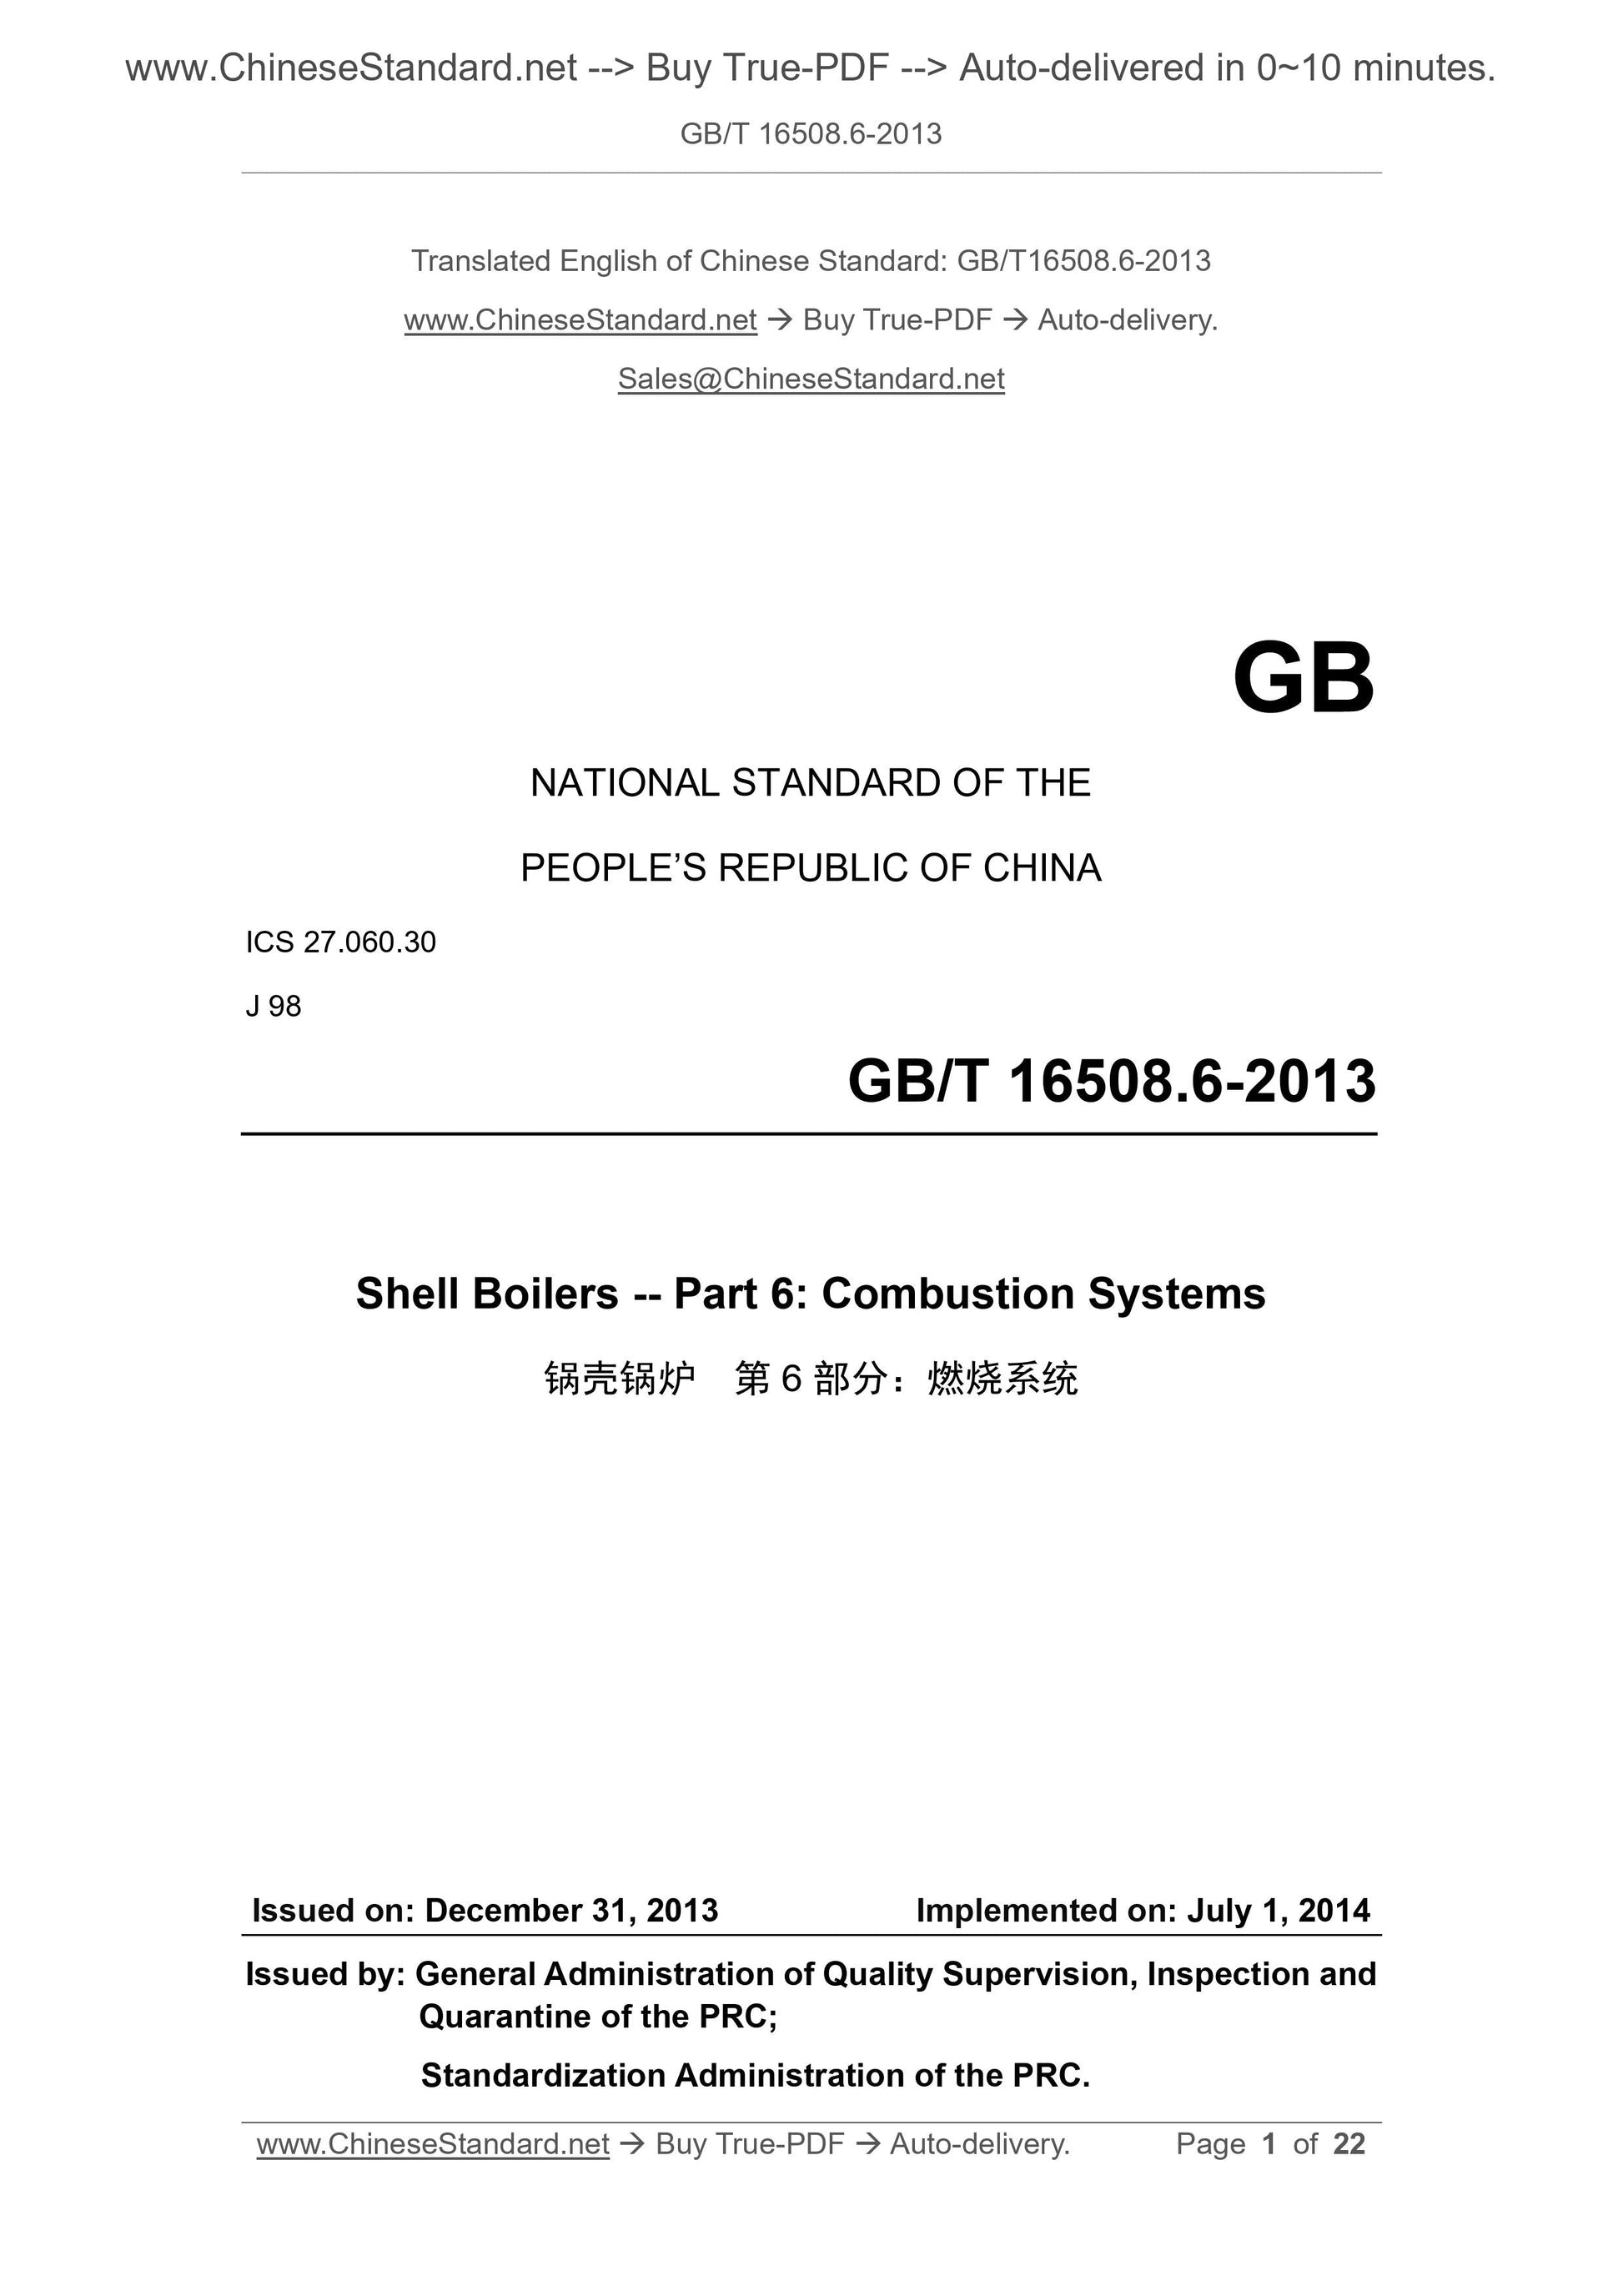 GB/T 16508.6-2013 Page 1